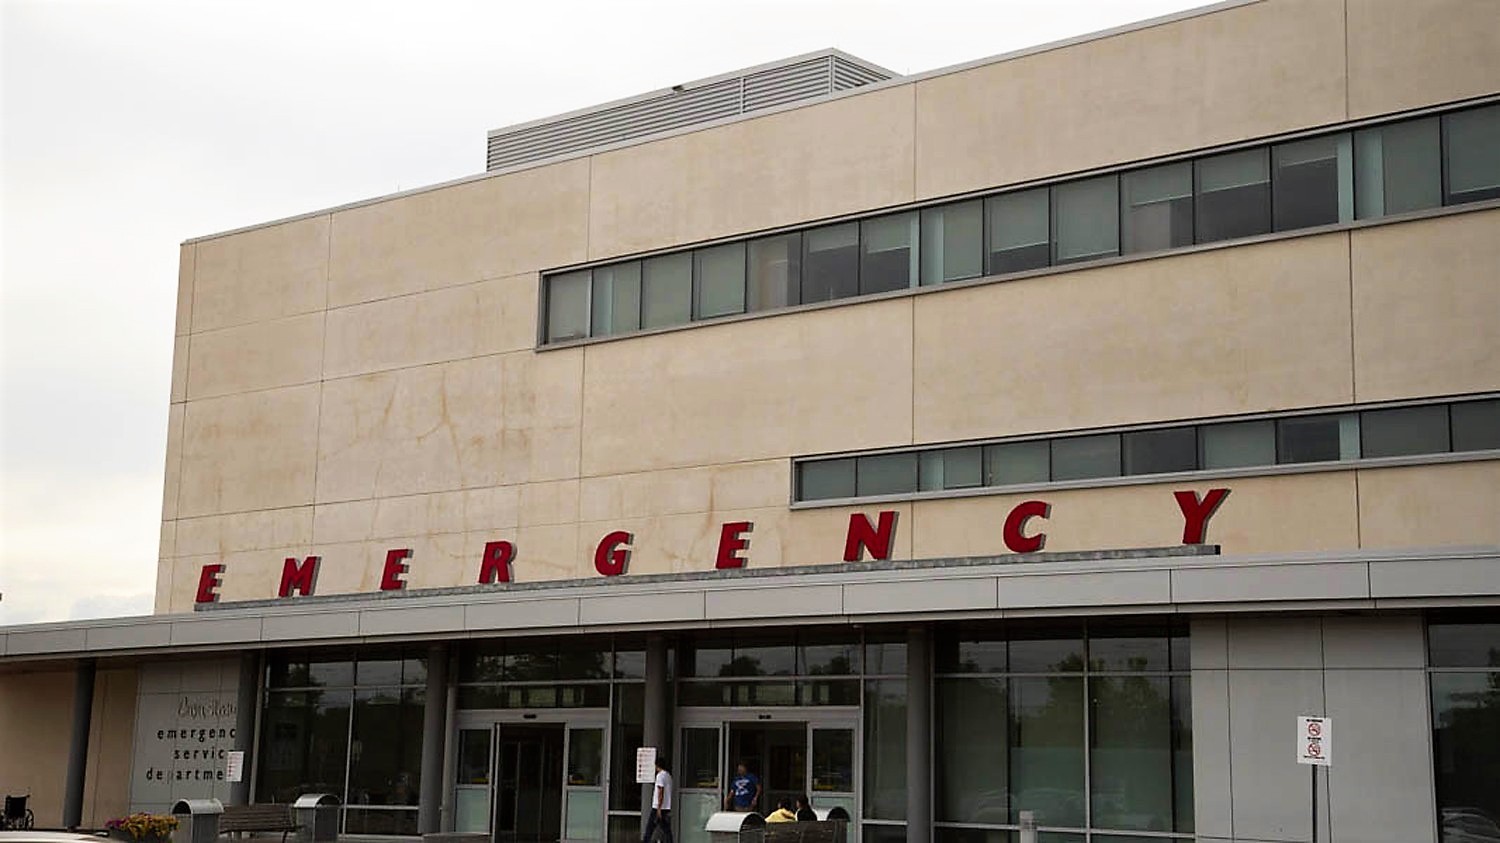 Brampton declared a healthcare emergency 2 years ago, nothing has changed councillors say